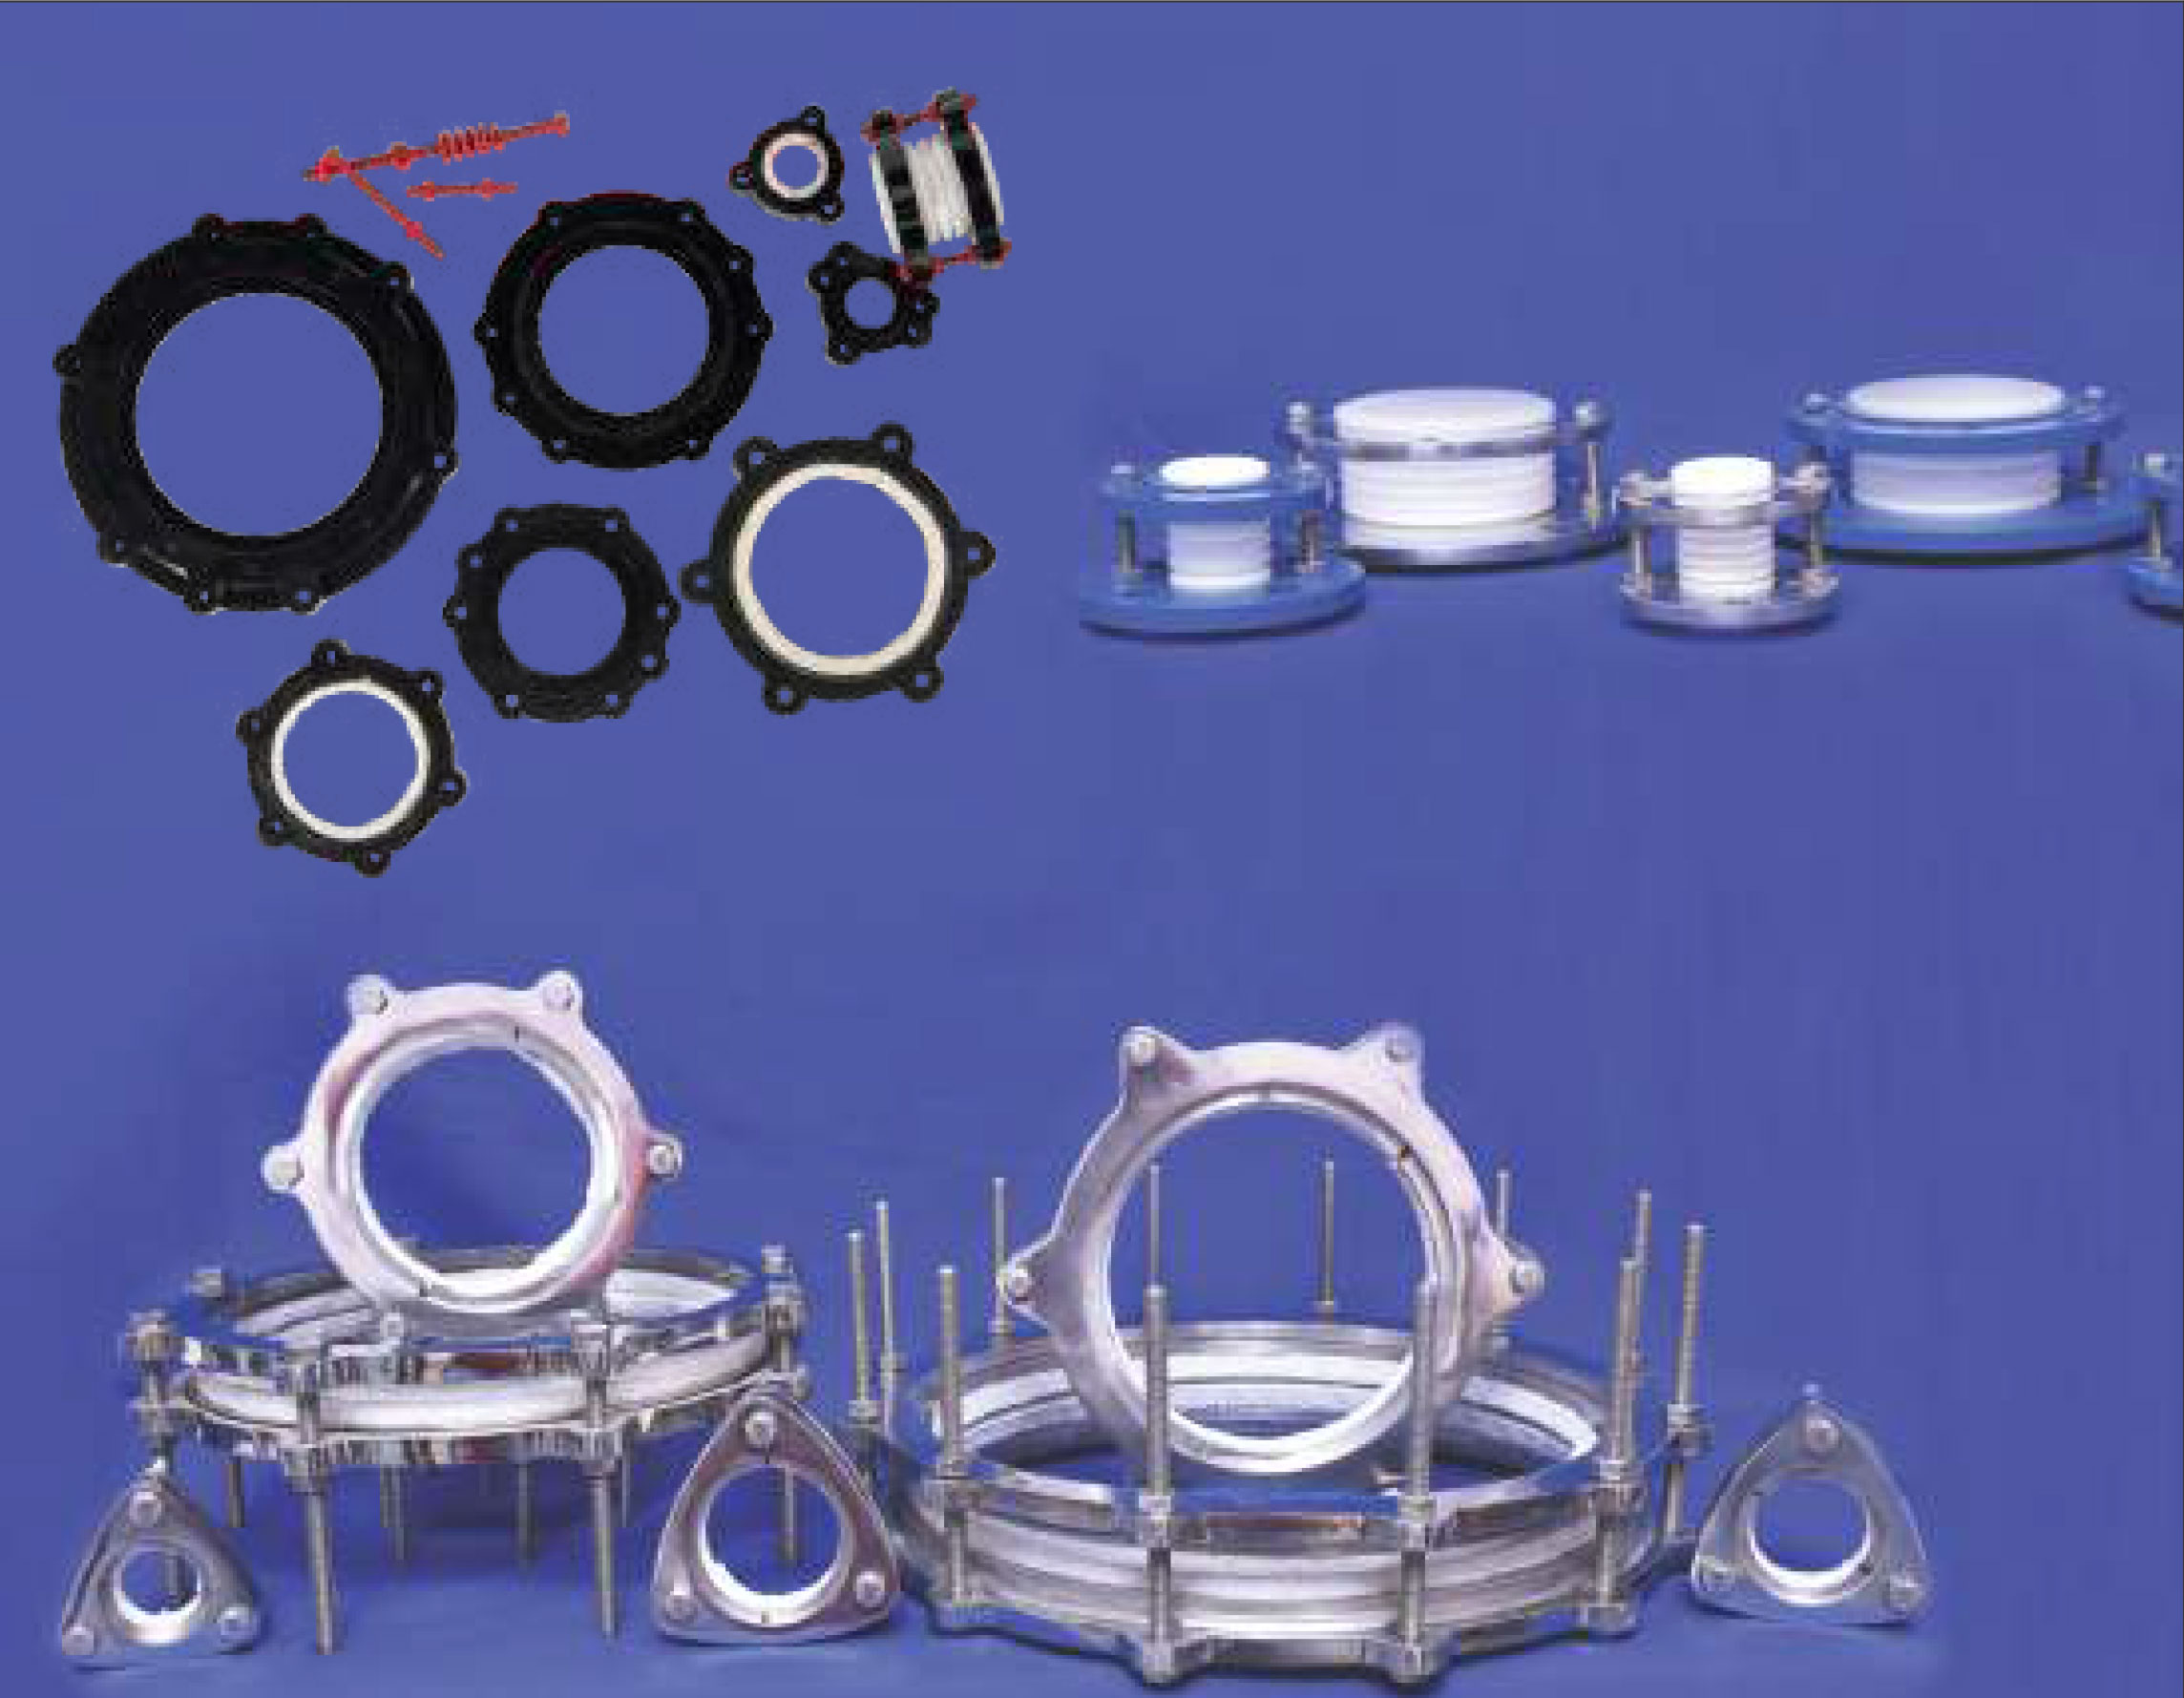 Buy Couplings and Backing Flange, Couplings and Backing Flange price,  Quick Release Couplings, Inserts,PTFE O Ring With Locking Collar, PTFE Bellows Glass To Glass, Complete Couplings, Bellow Flanges, Adaptor Bellow Flanges, Adaptor Backing Flanges, Backing Flanges, manufacturing company, industry, equipments, Distributors, Dealers, Wholesalers, Manufacturers, in canada, Goel Scientific Glass Works Ltd, Canada